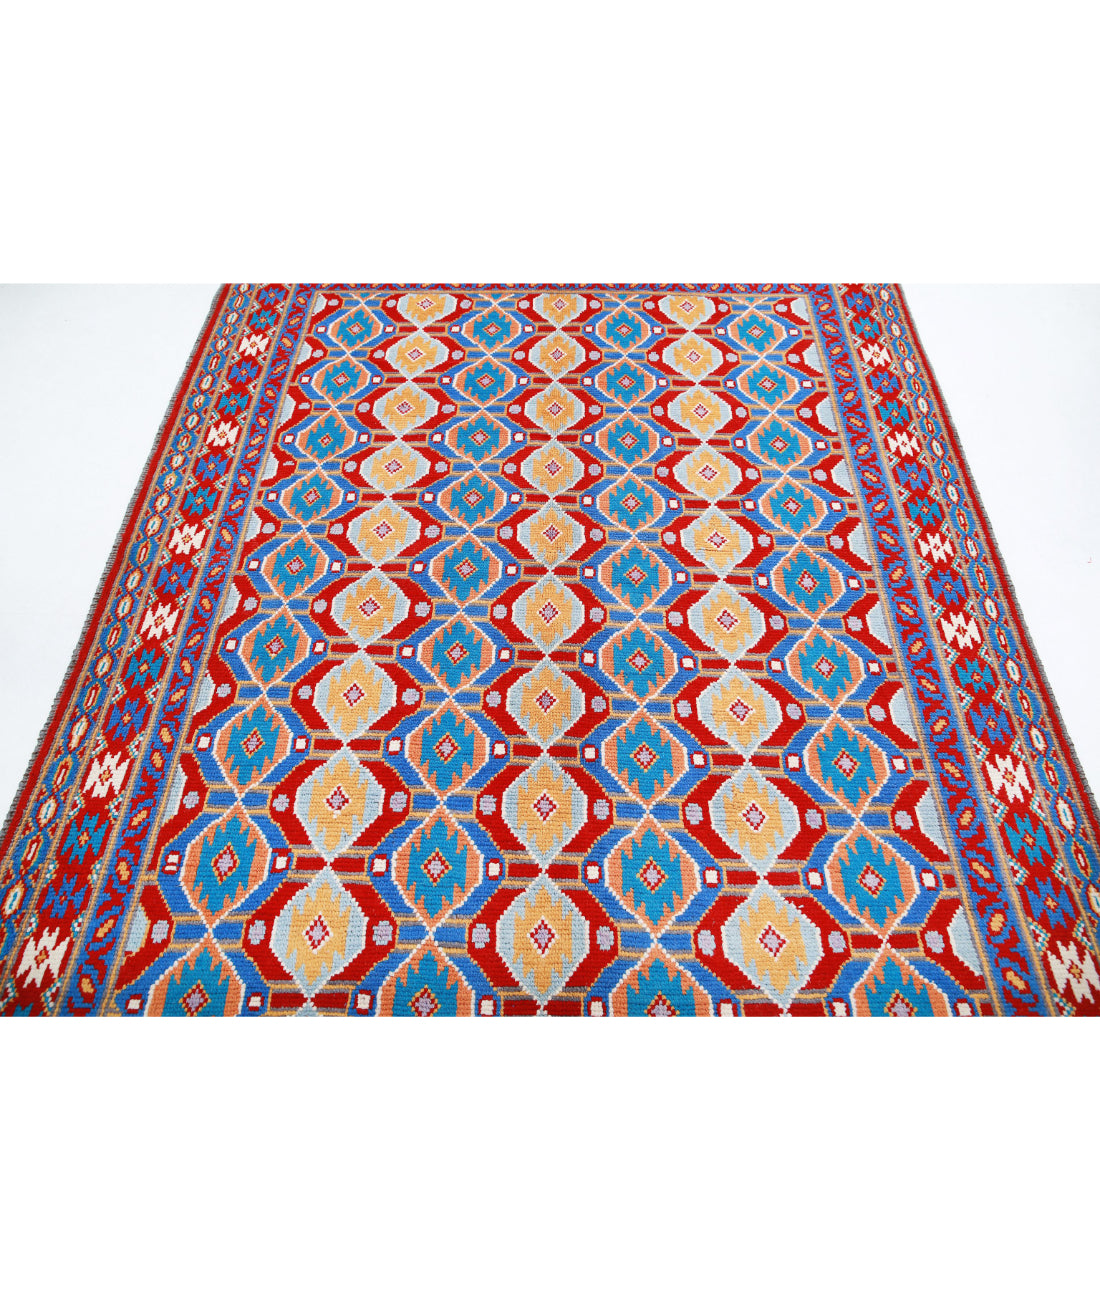 Revival 5'8'' X 7'9'' Hand-Knotted Wool Rug 5'8'' x 7'9'' (170 X 233) / Red / Multi